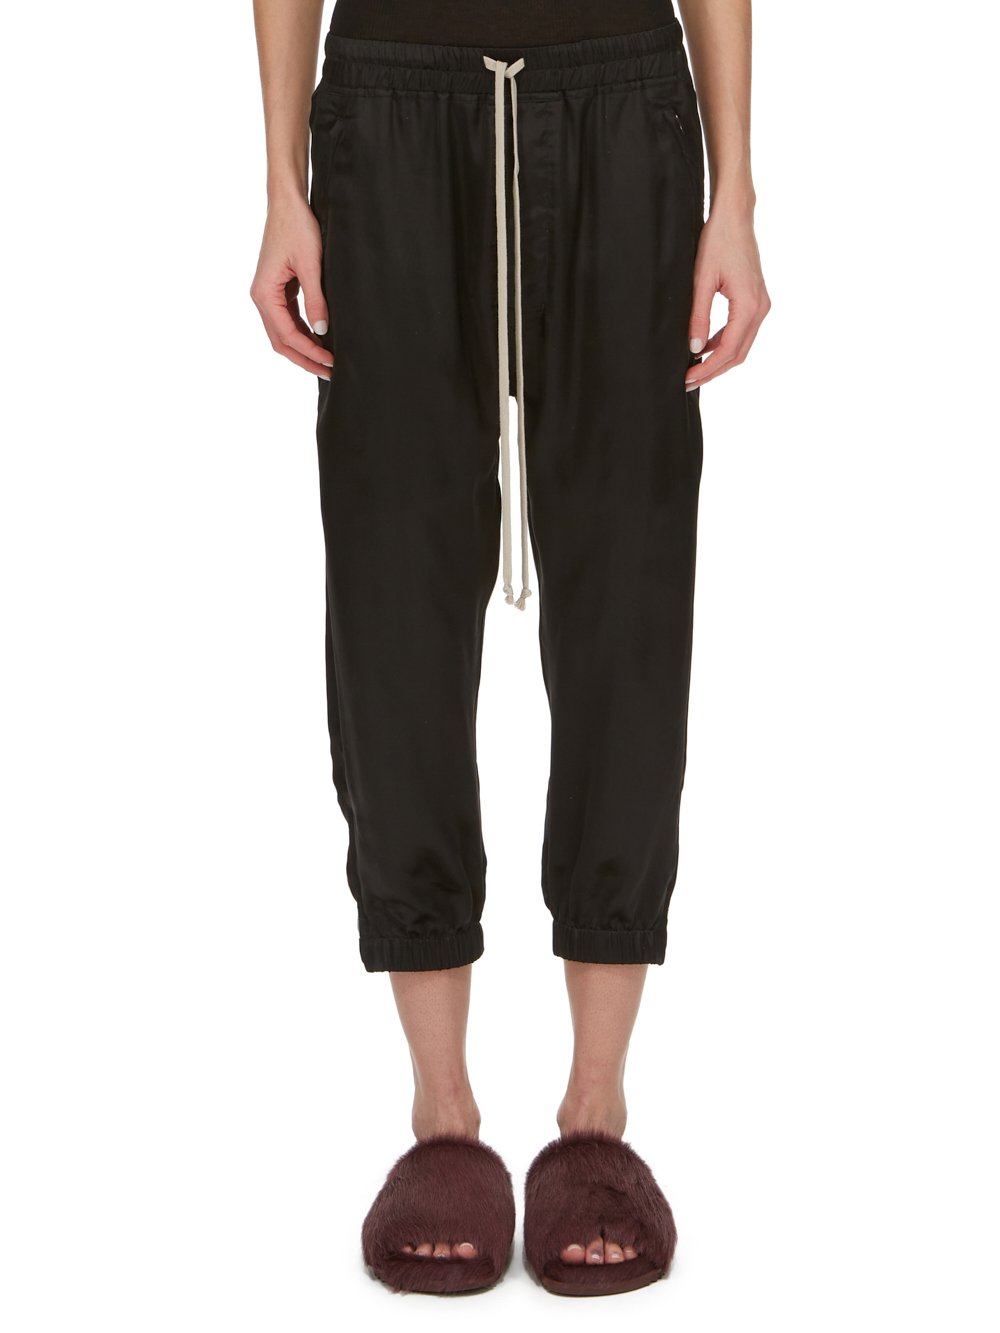 RICK OWENS FW23 LUXOR CROPPED TRACK IN BLACK CUPRO SATIN